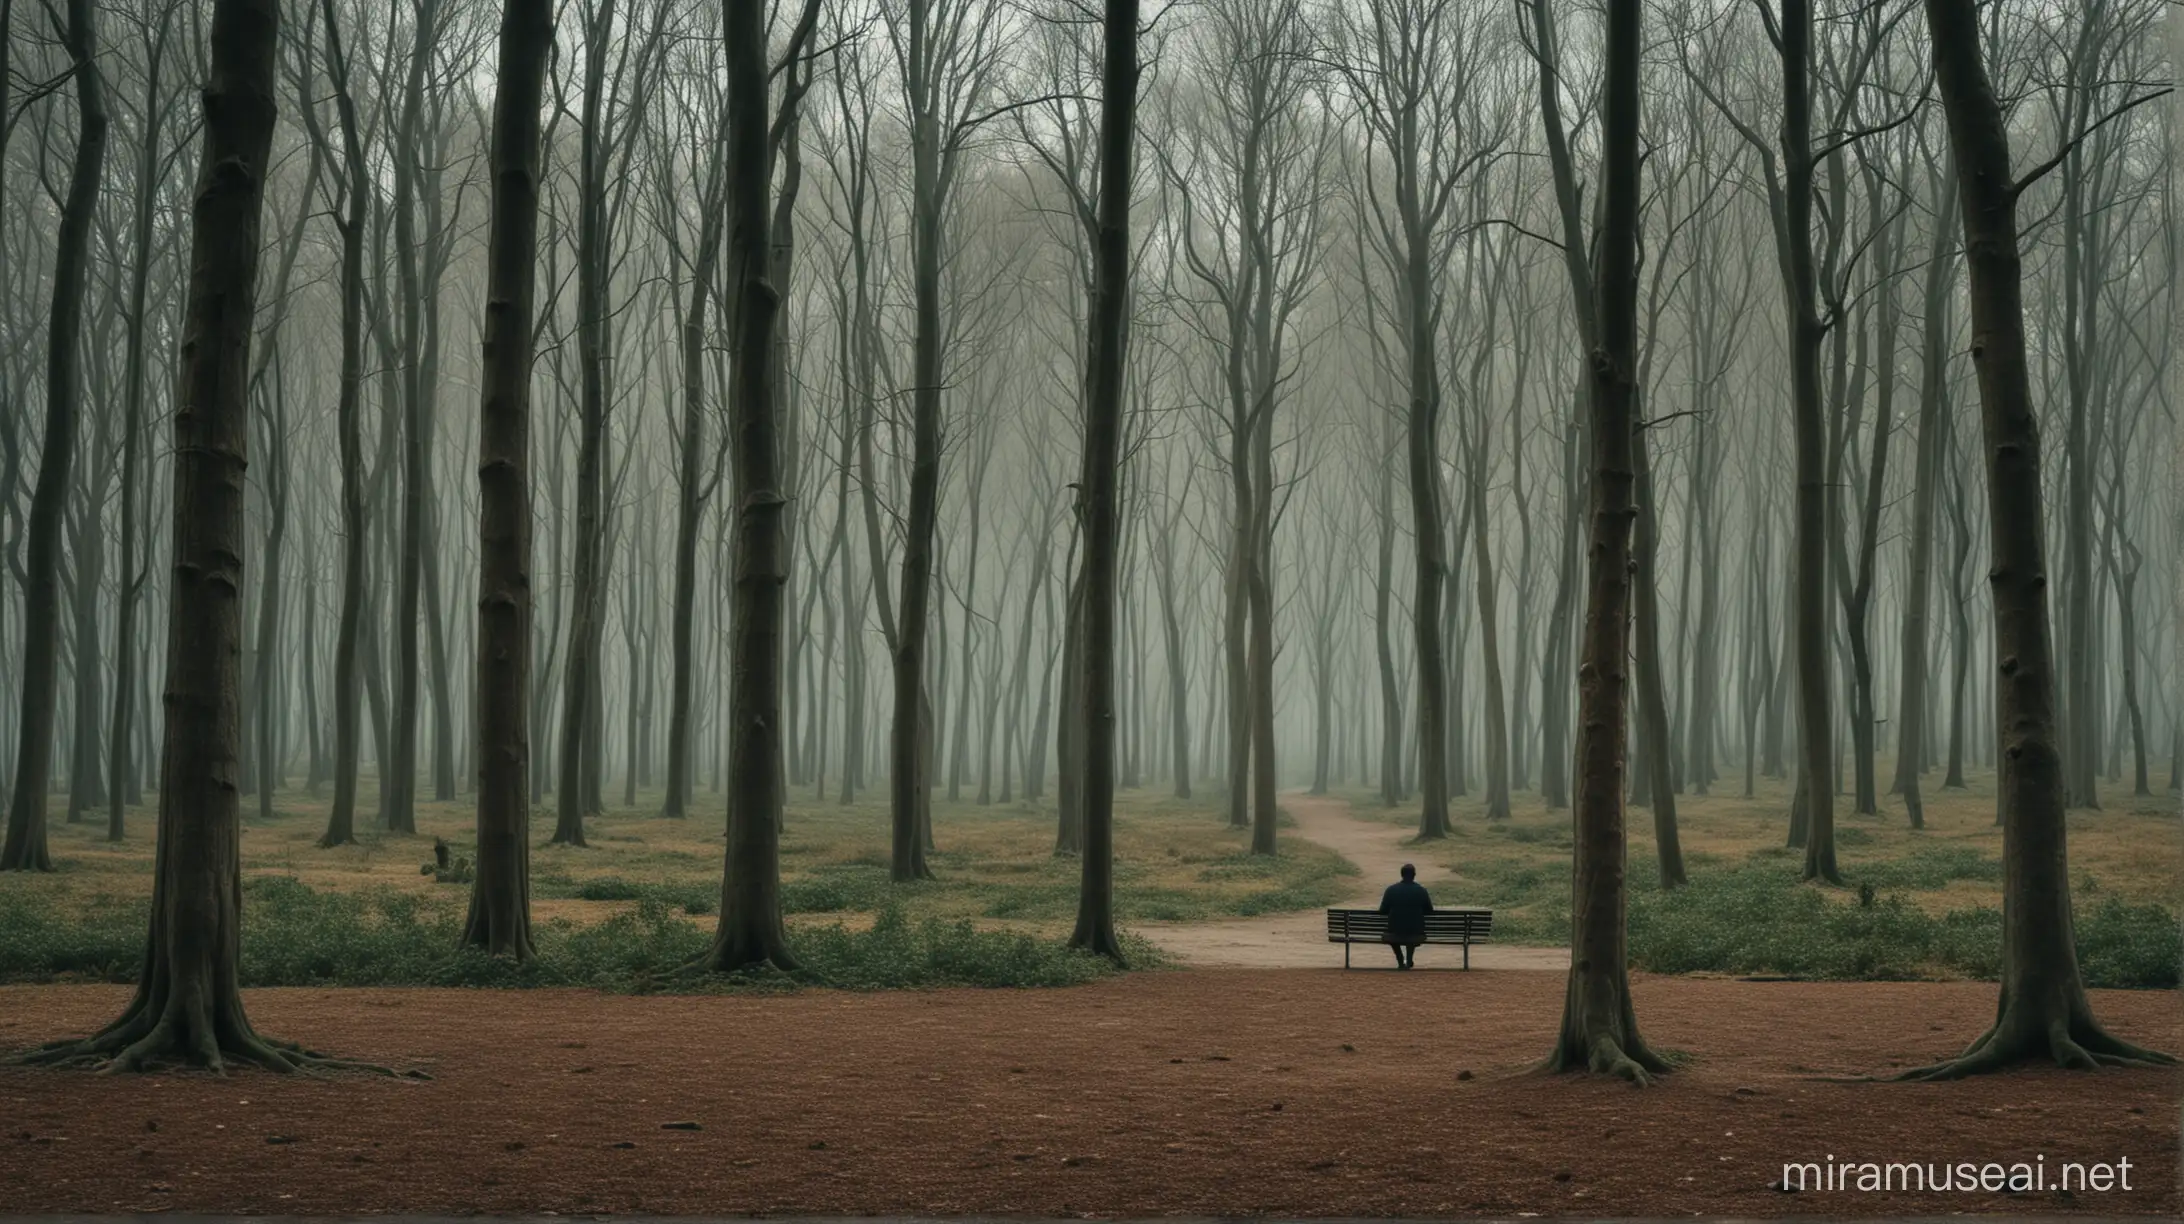 People Sitting on Bench in Surreal Forest Park Scene